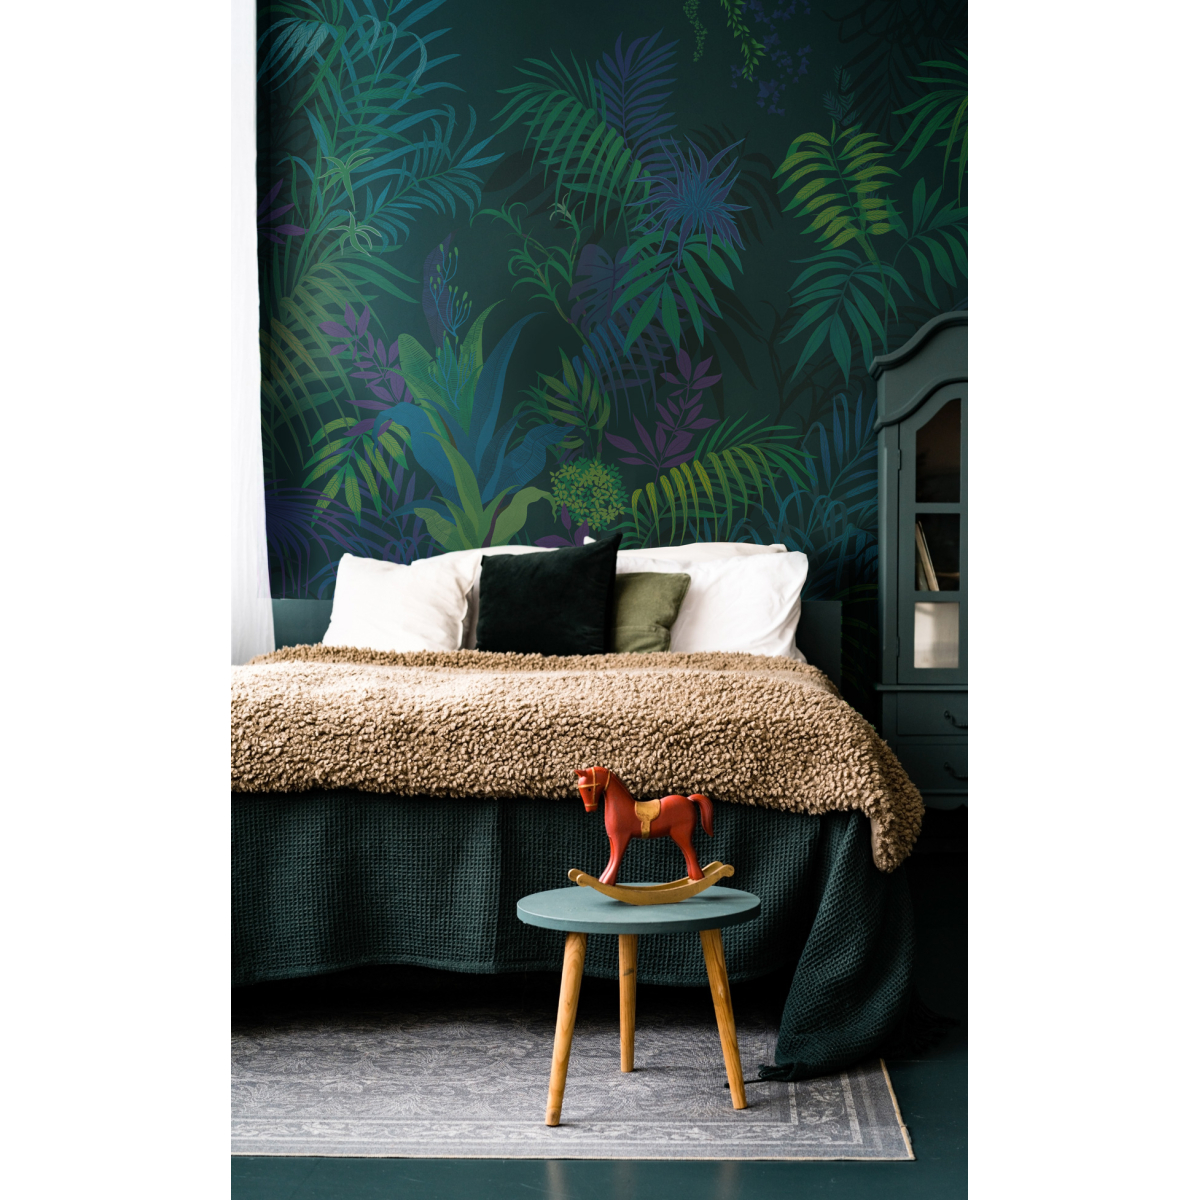 Panoramic Jungle Chamarée wallpaper by Peggy Nille - Acte-Deco